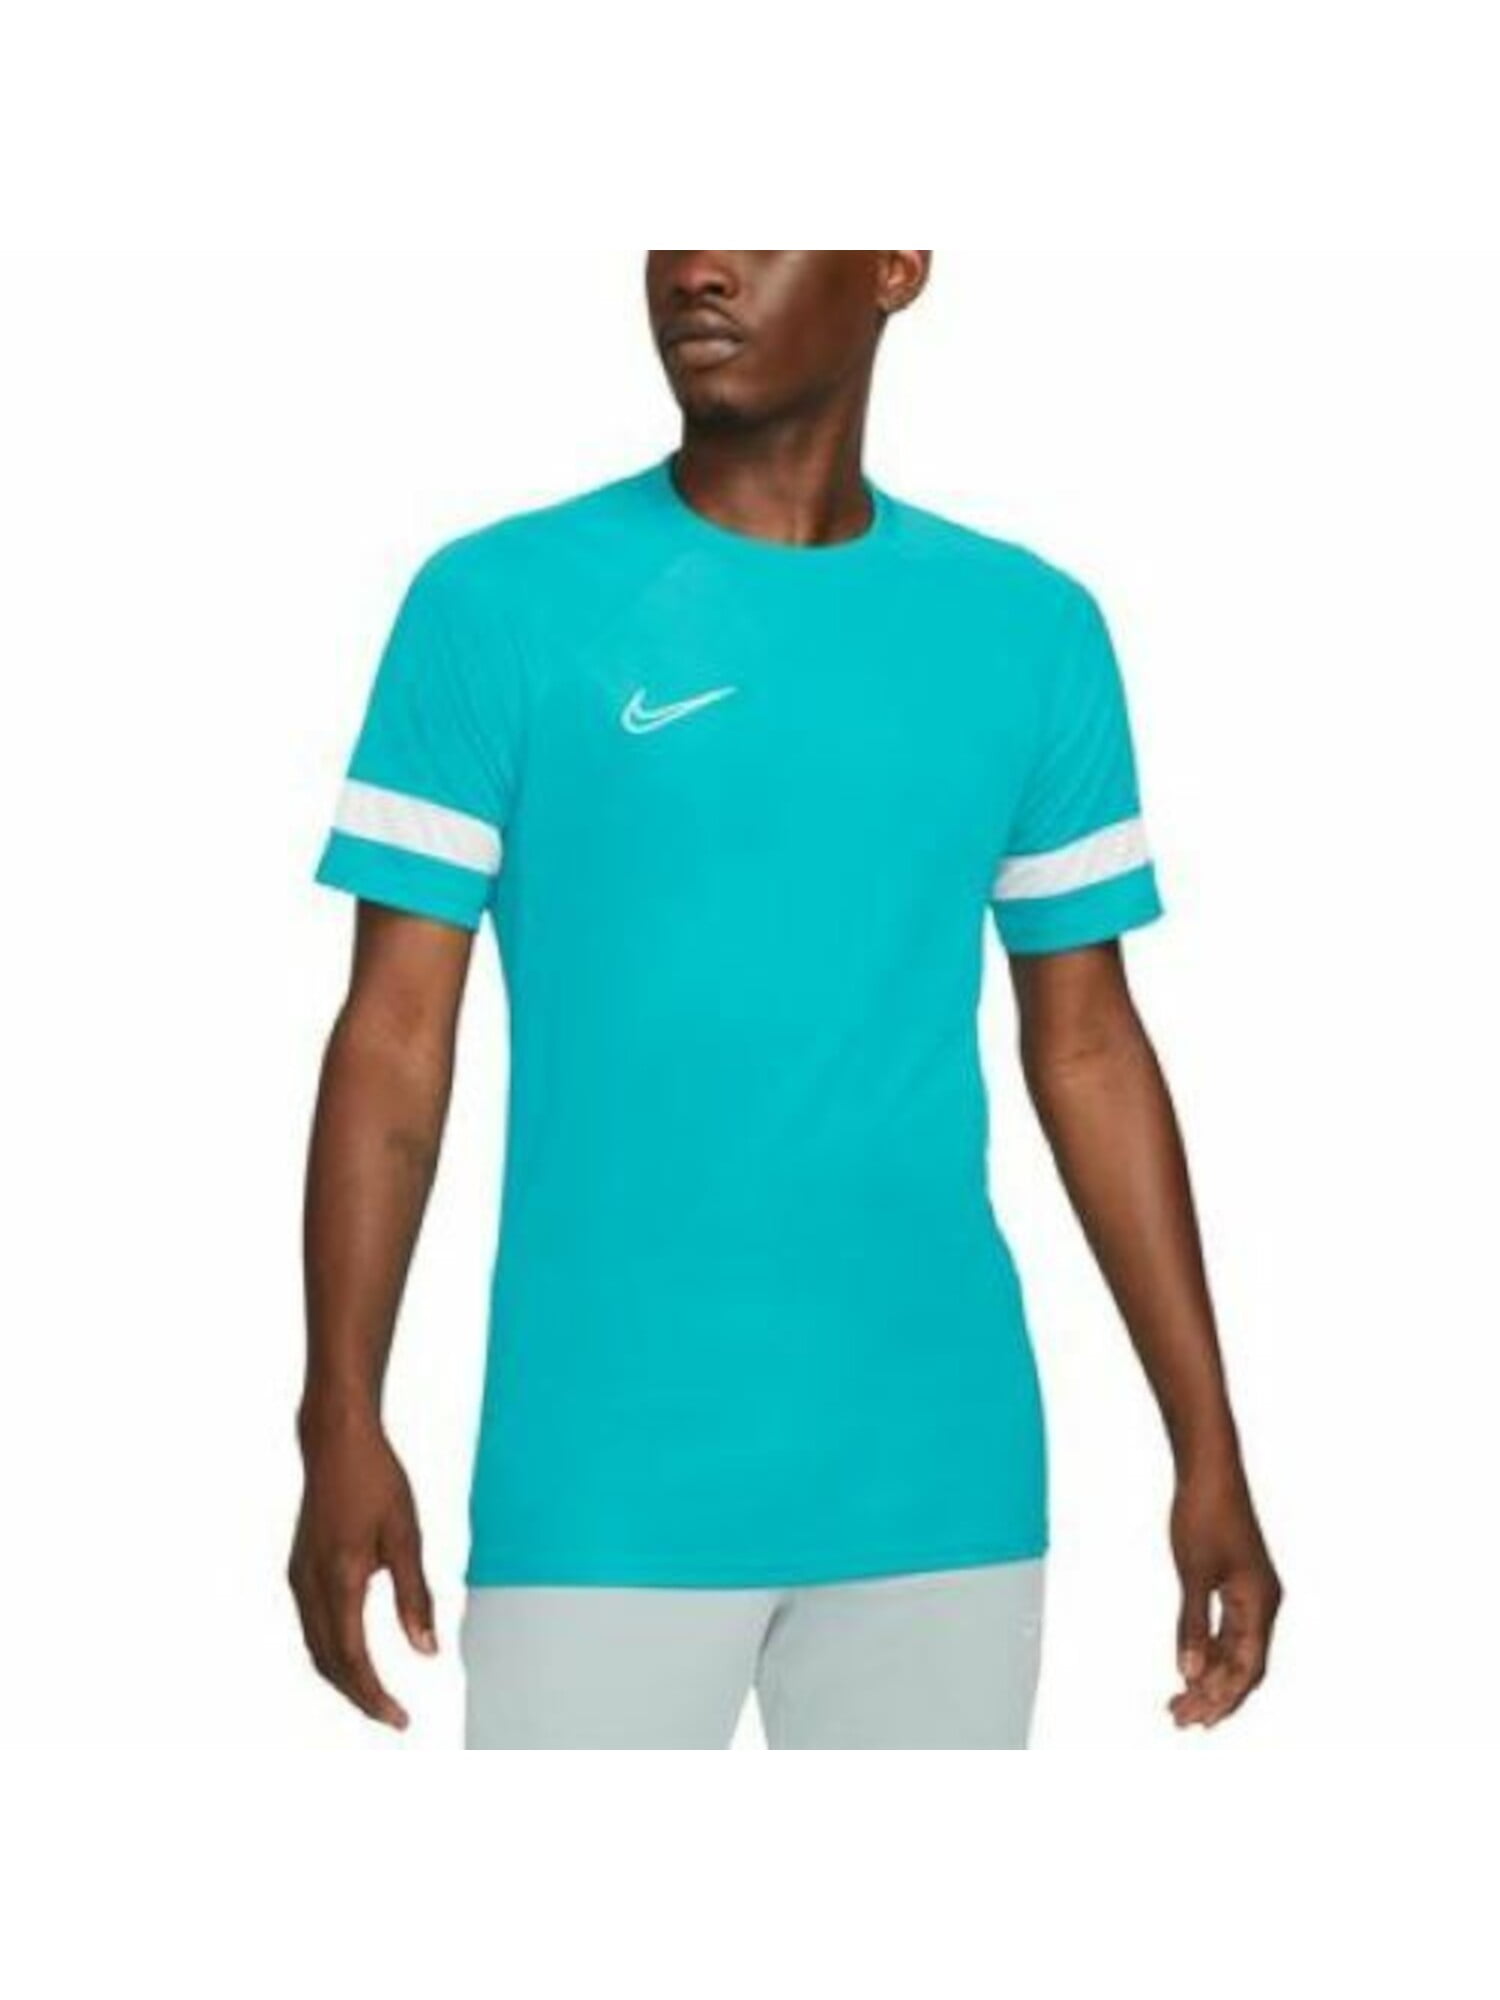 Mens Academy Soccer Turquoise Classic Fit Moisture Wicking T-Shirt XXL -